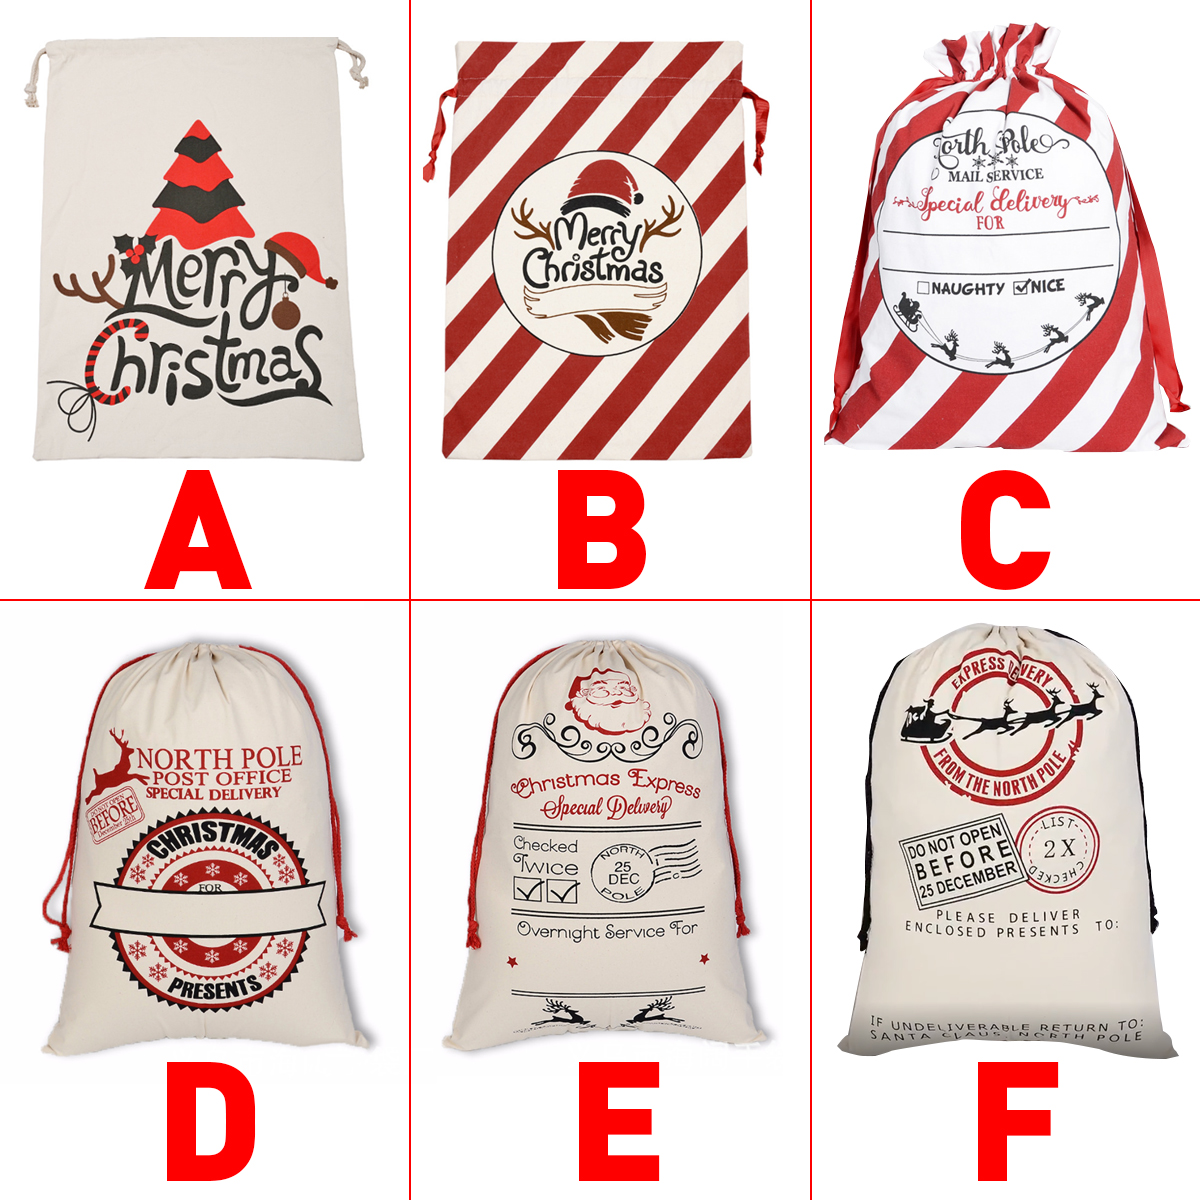 Santa-Sack-Canvas-Bag-Party-Christmas-Candy-Bags-Xmas-Decorations-for-Kids-Gift-1589089-2